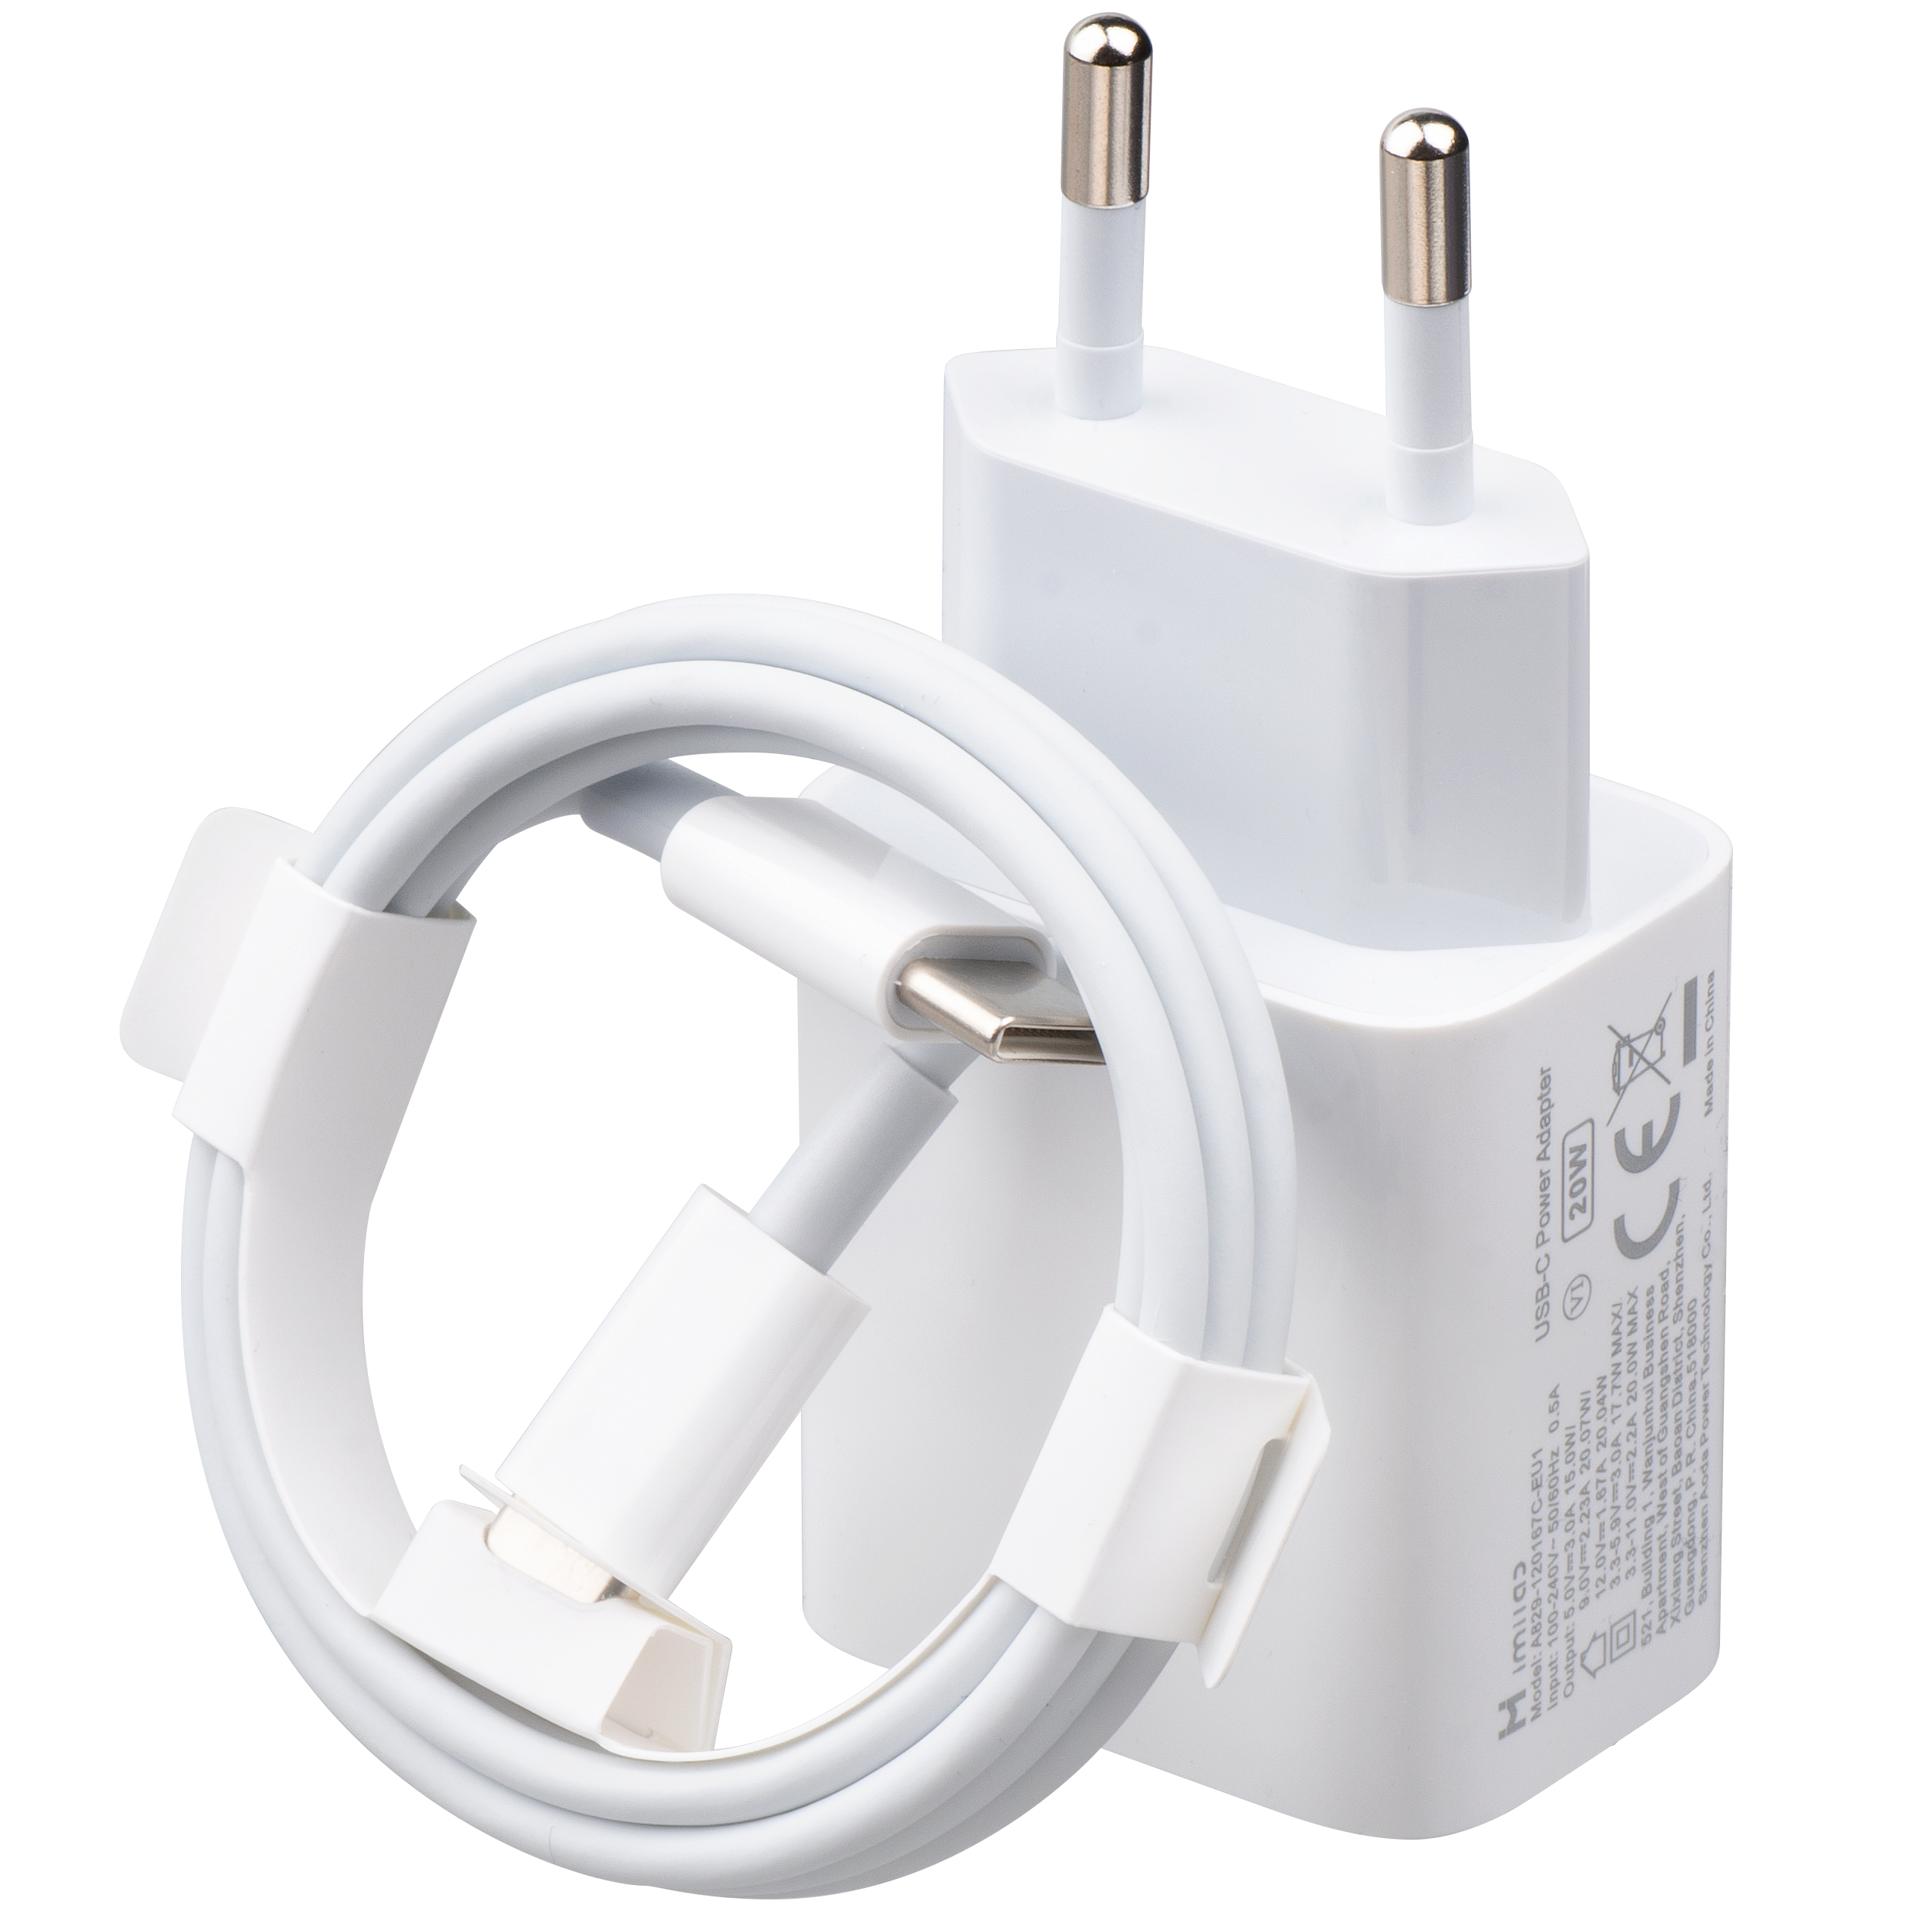 xiaomi-imilab-travel-charger-type-c-with-cable-2C-20w-white--28eu-blister-29